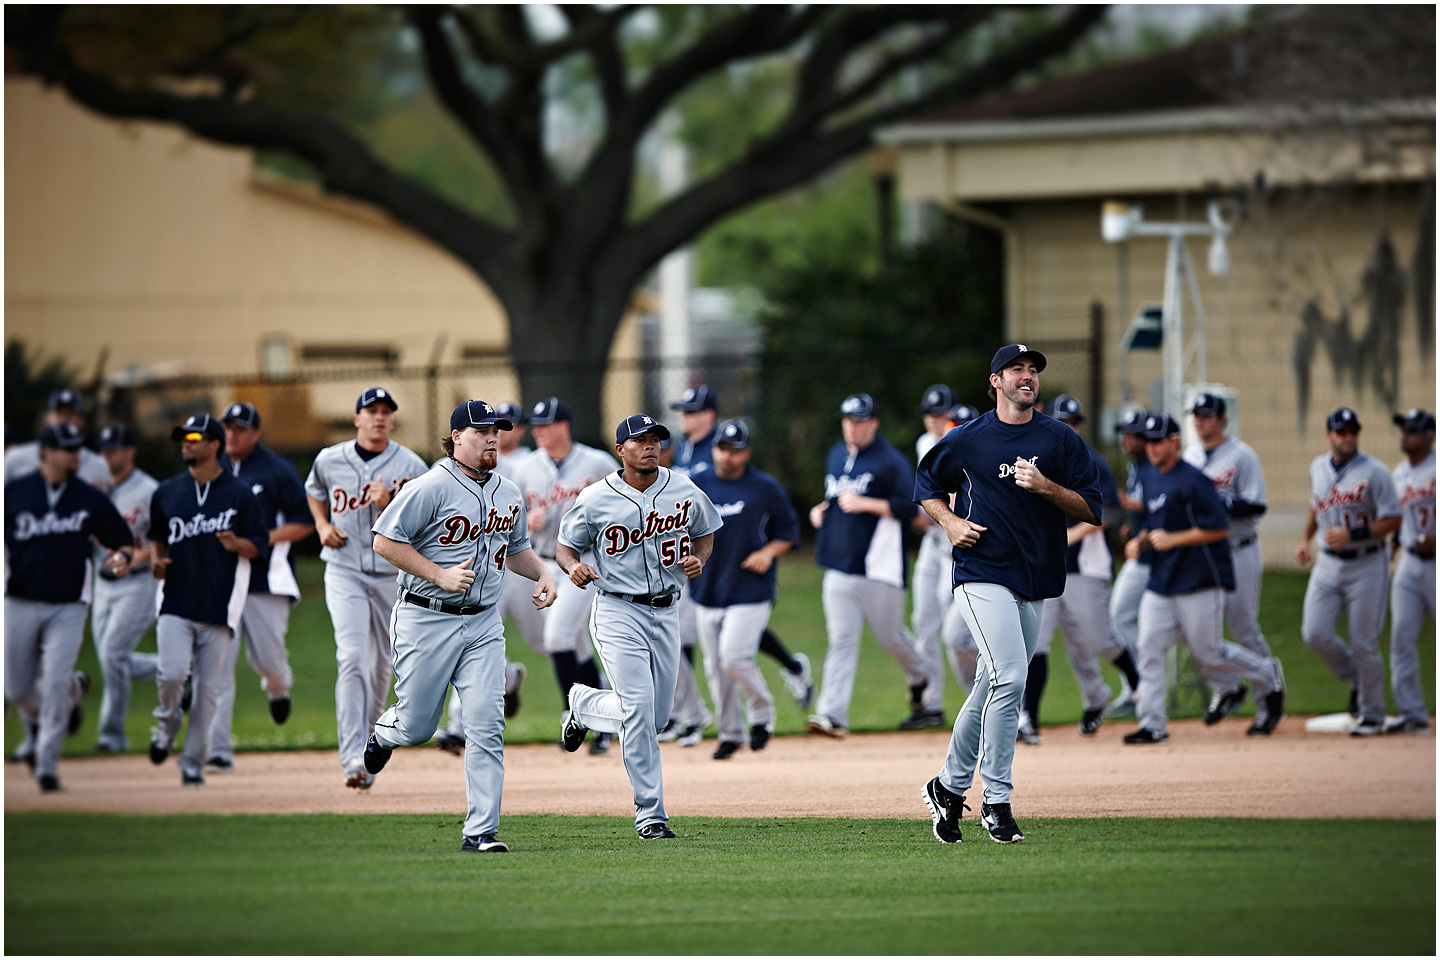 Detroit Tigers Spring Training 2012 - Its Good To Be A Tiger